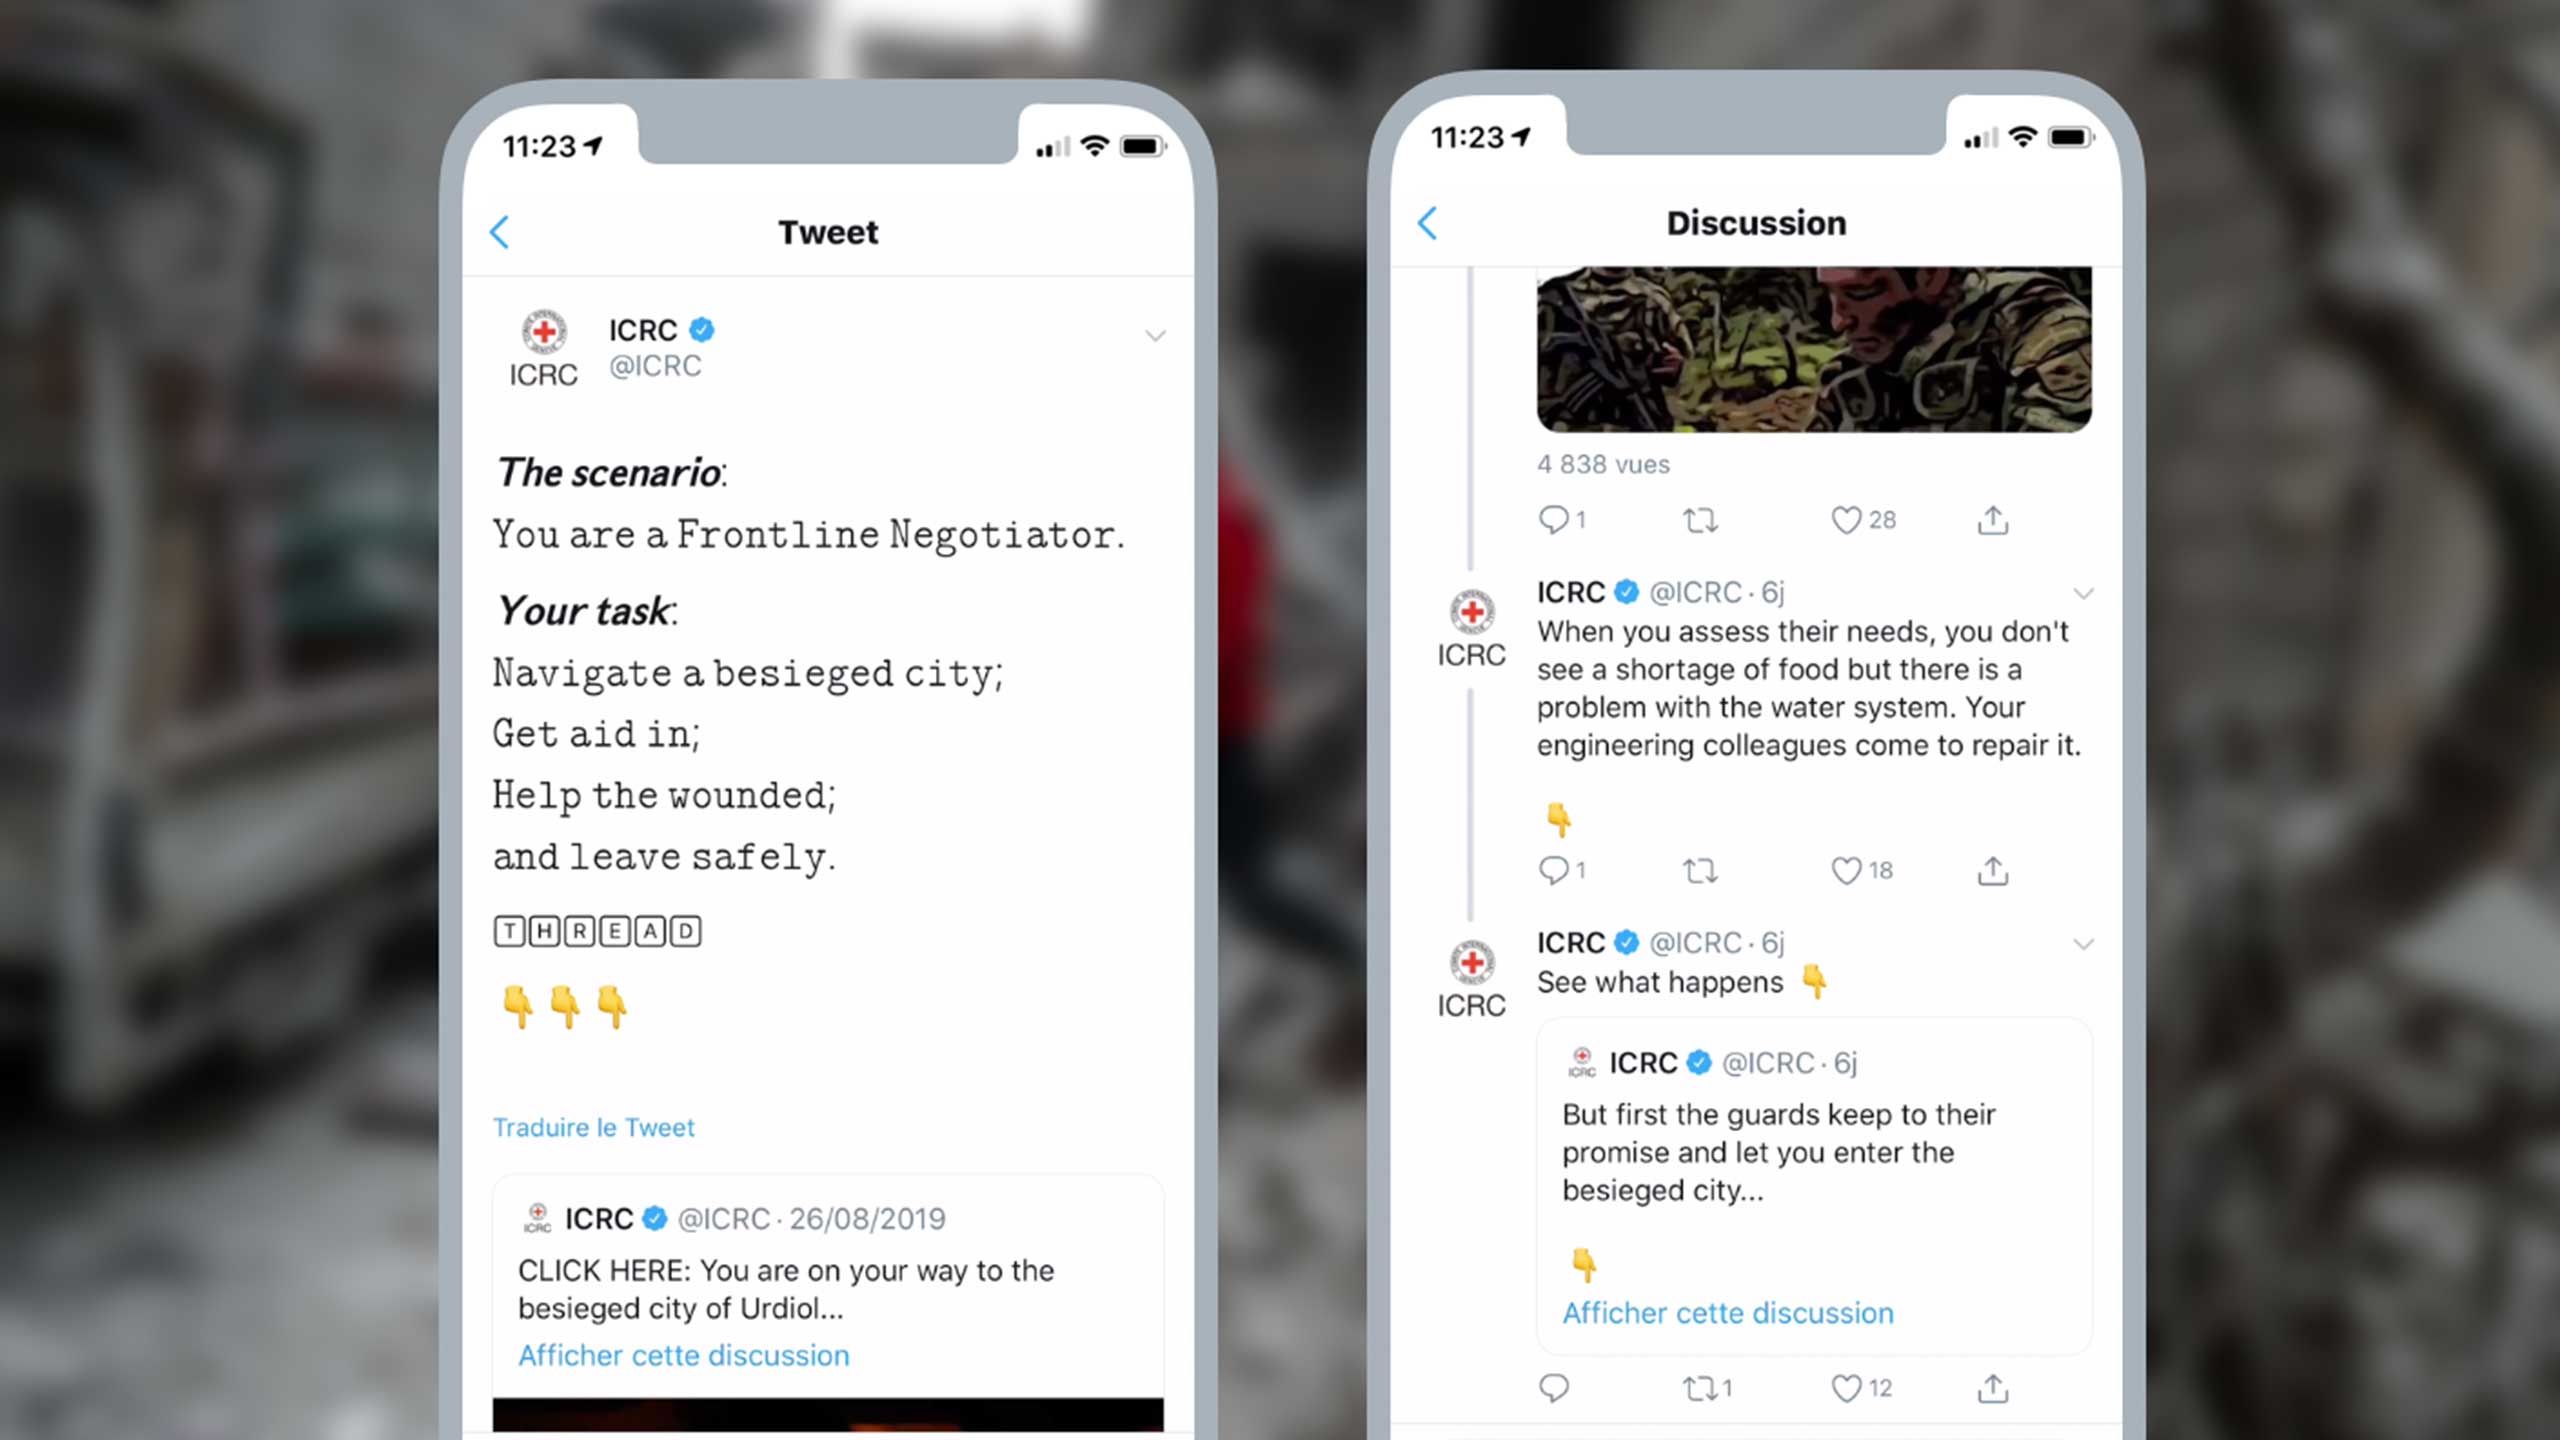 Phones showing the ICRC work on Twitter